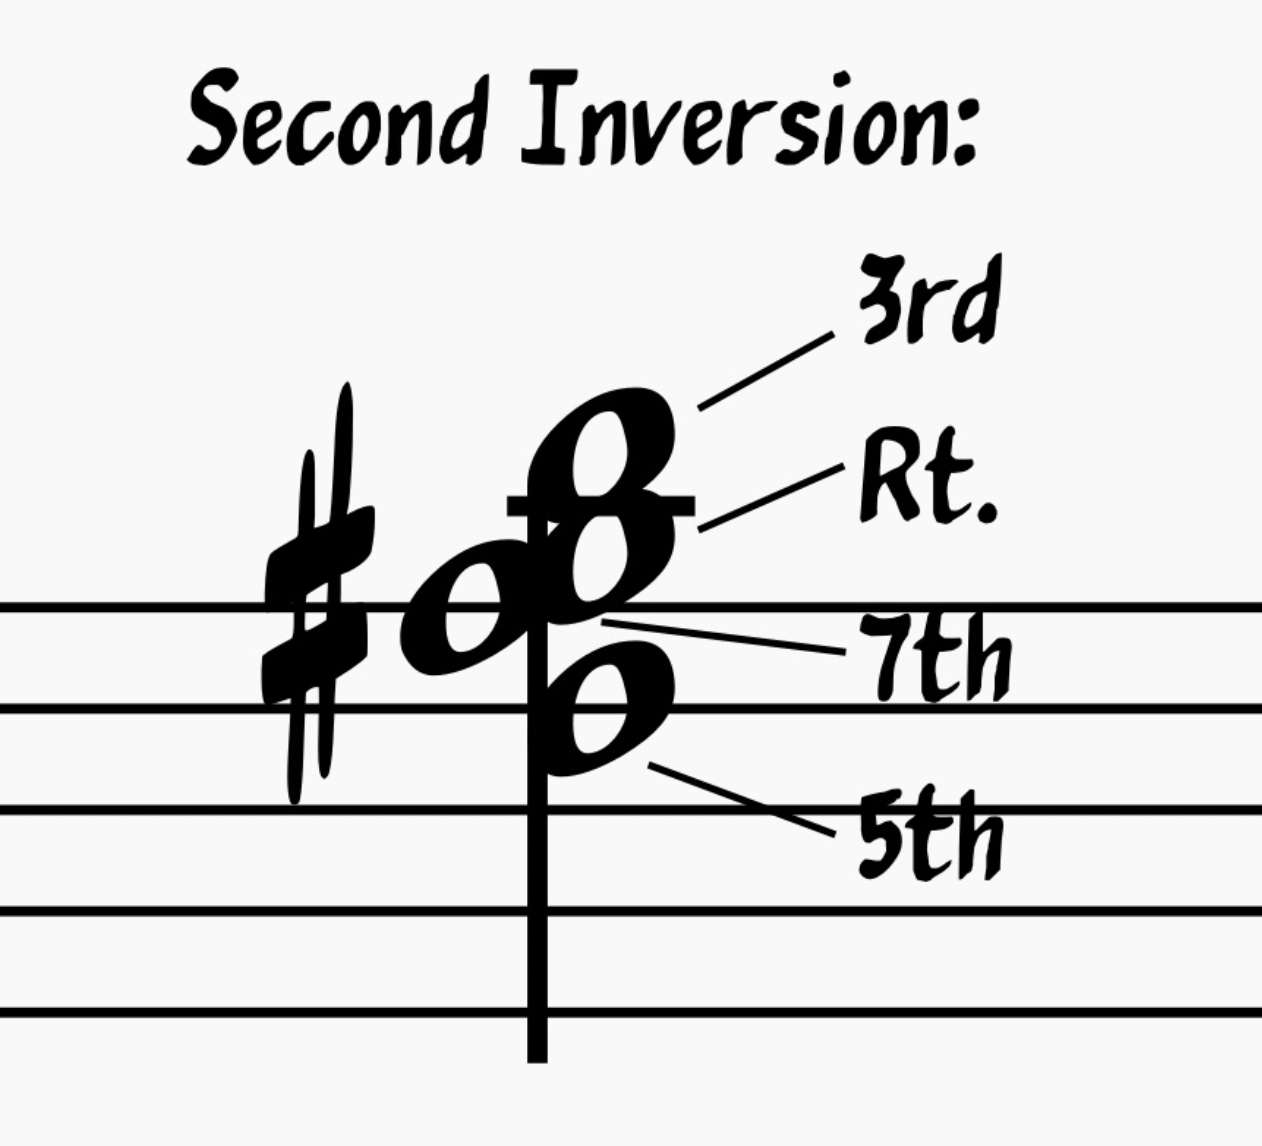 Second Inversion G Major 7th chord